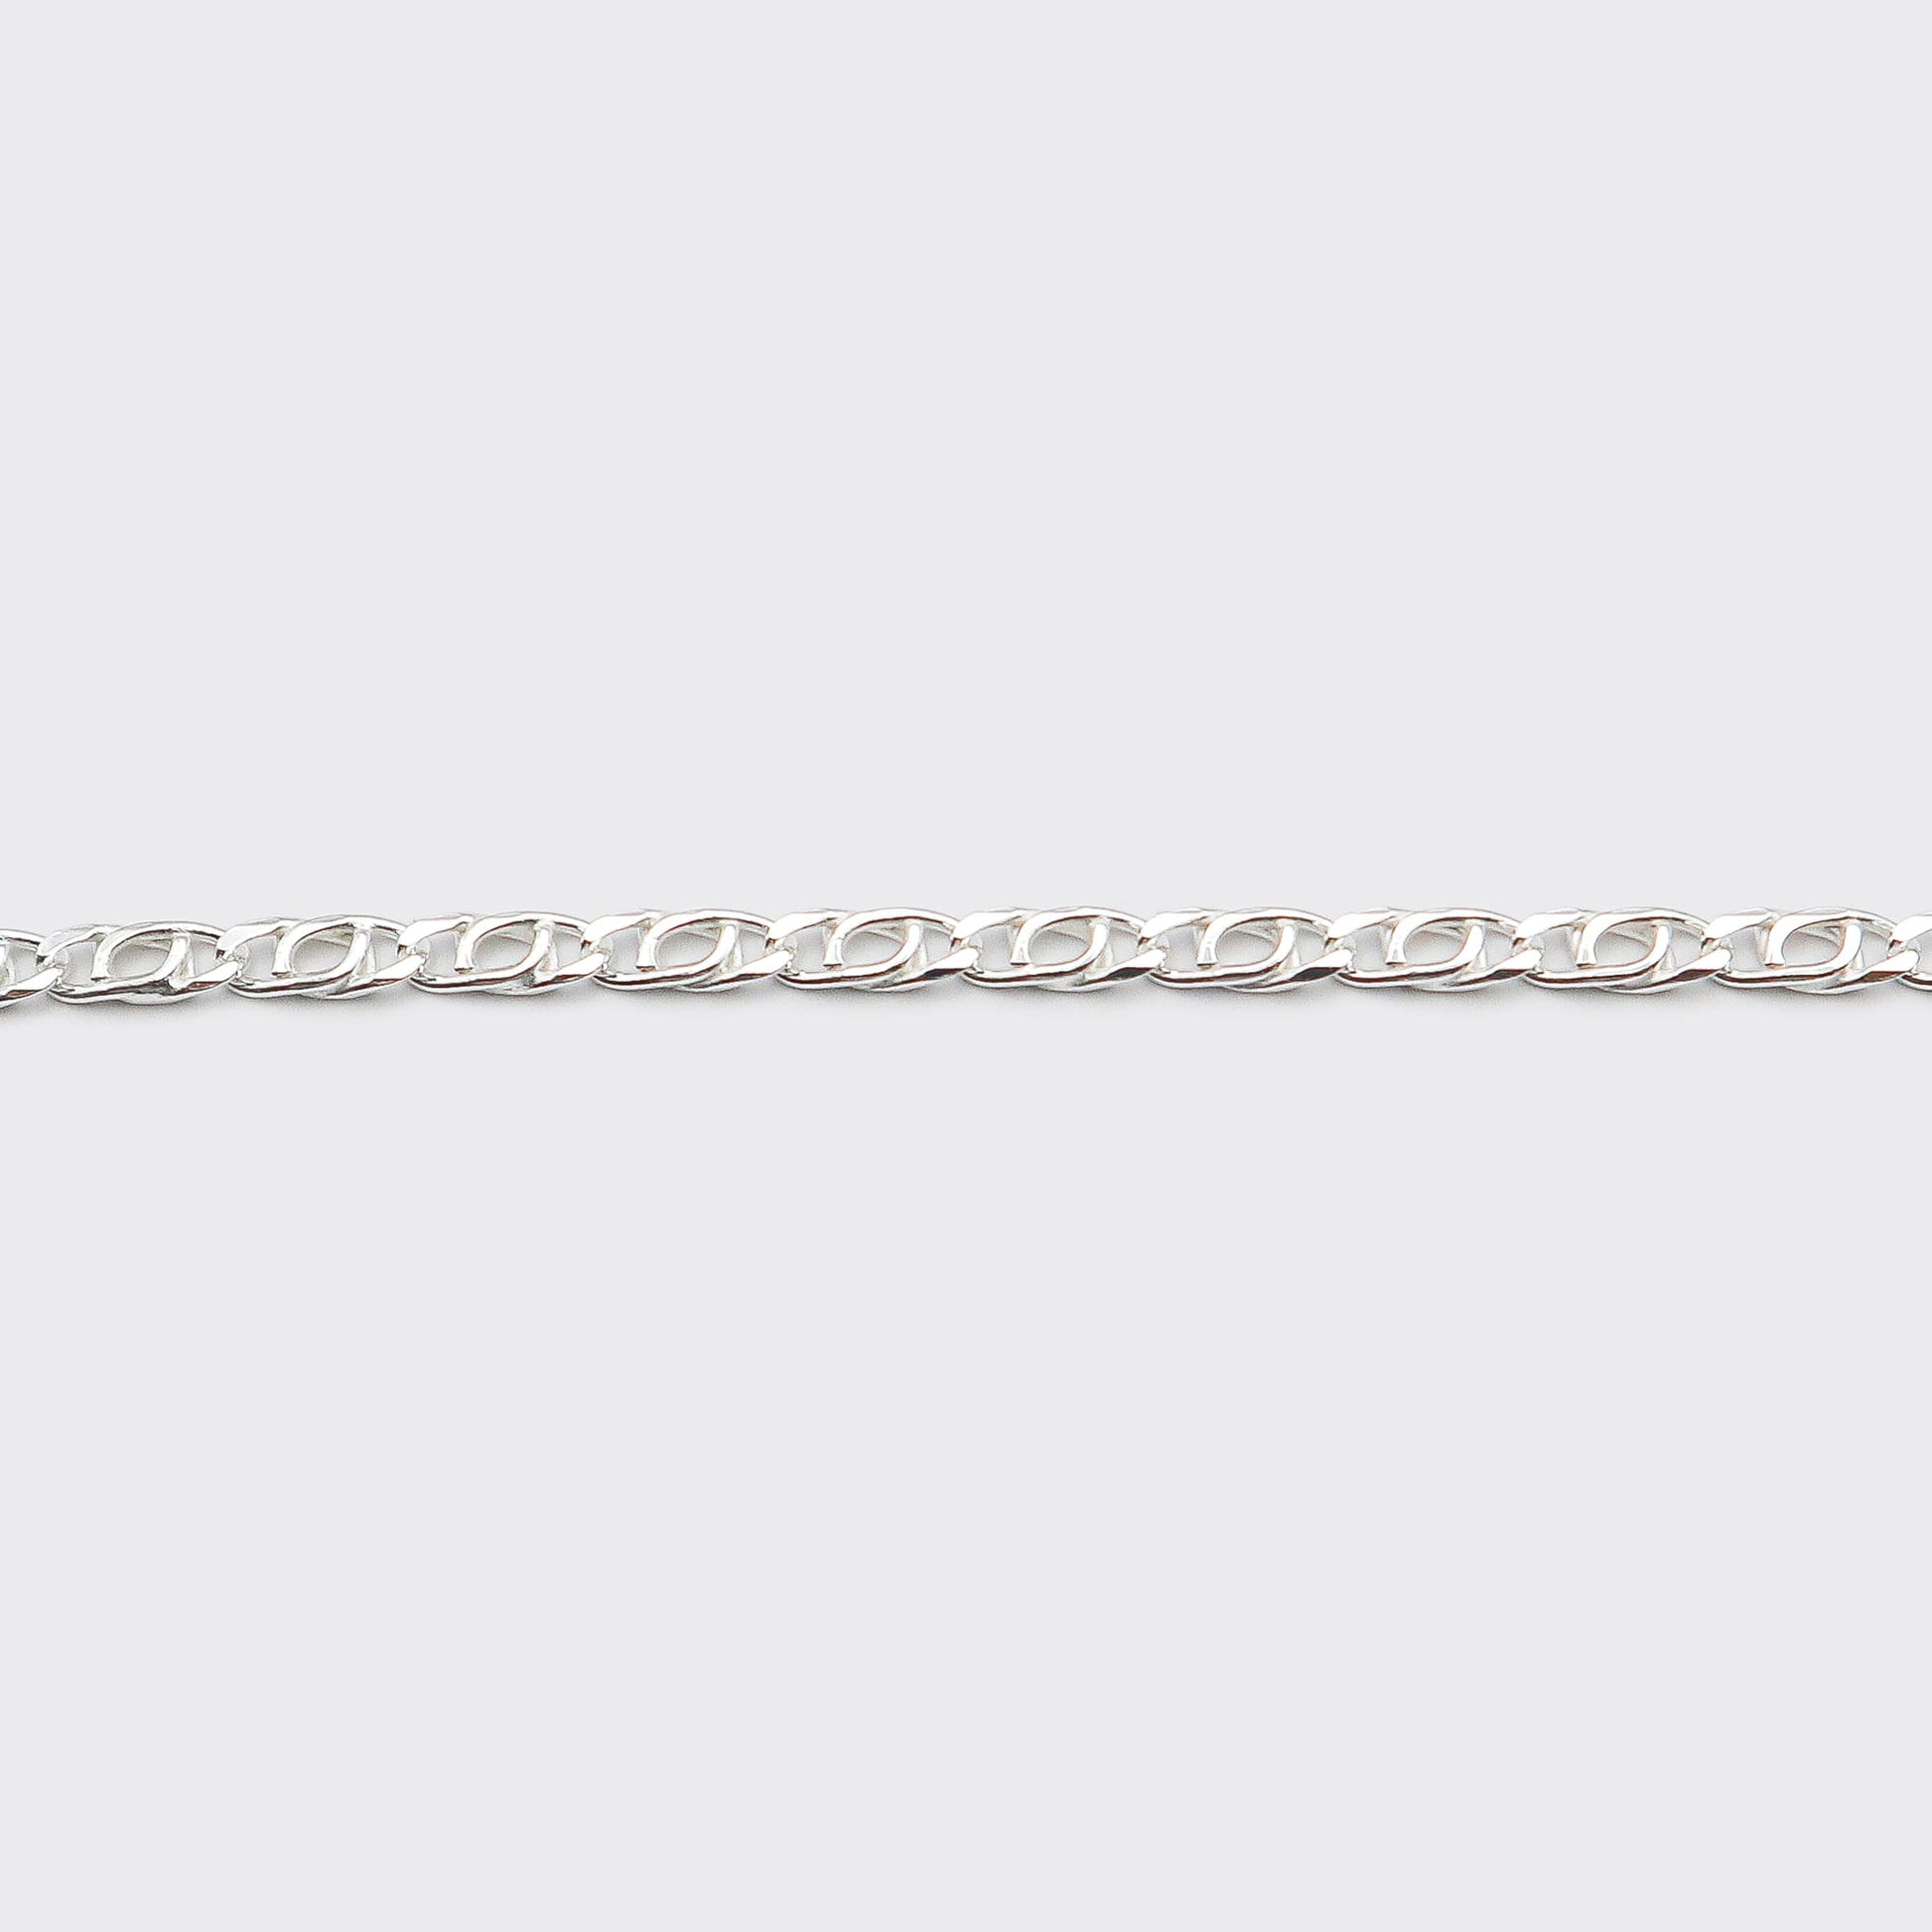 The Cartridge chain is an elegant and unisex piece of jewelry, crafted in Italy and made of 925 Sterling Silver. Every jewelry is designed by Atelier Domingo's in France and is made to be worn by both men and women.